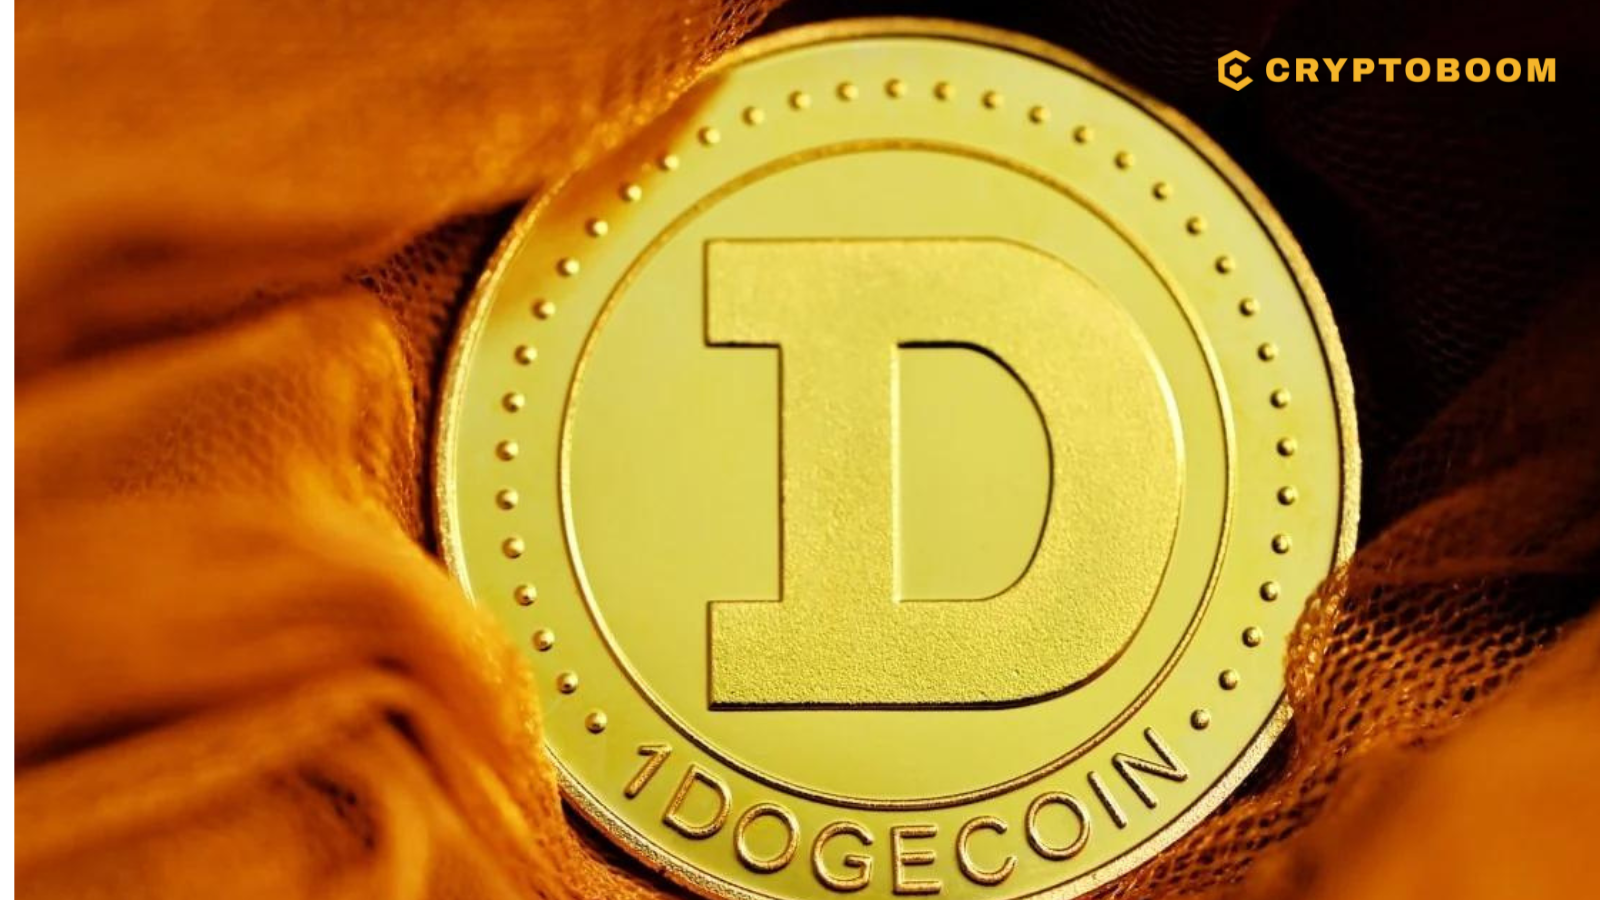 Dogecoin's $1 Billion Transaction Spike Fuels 5% Price Rally